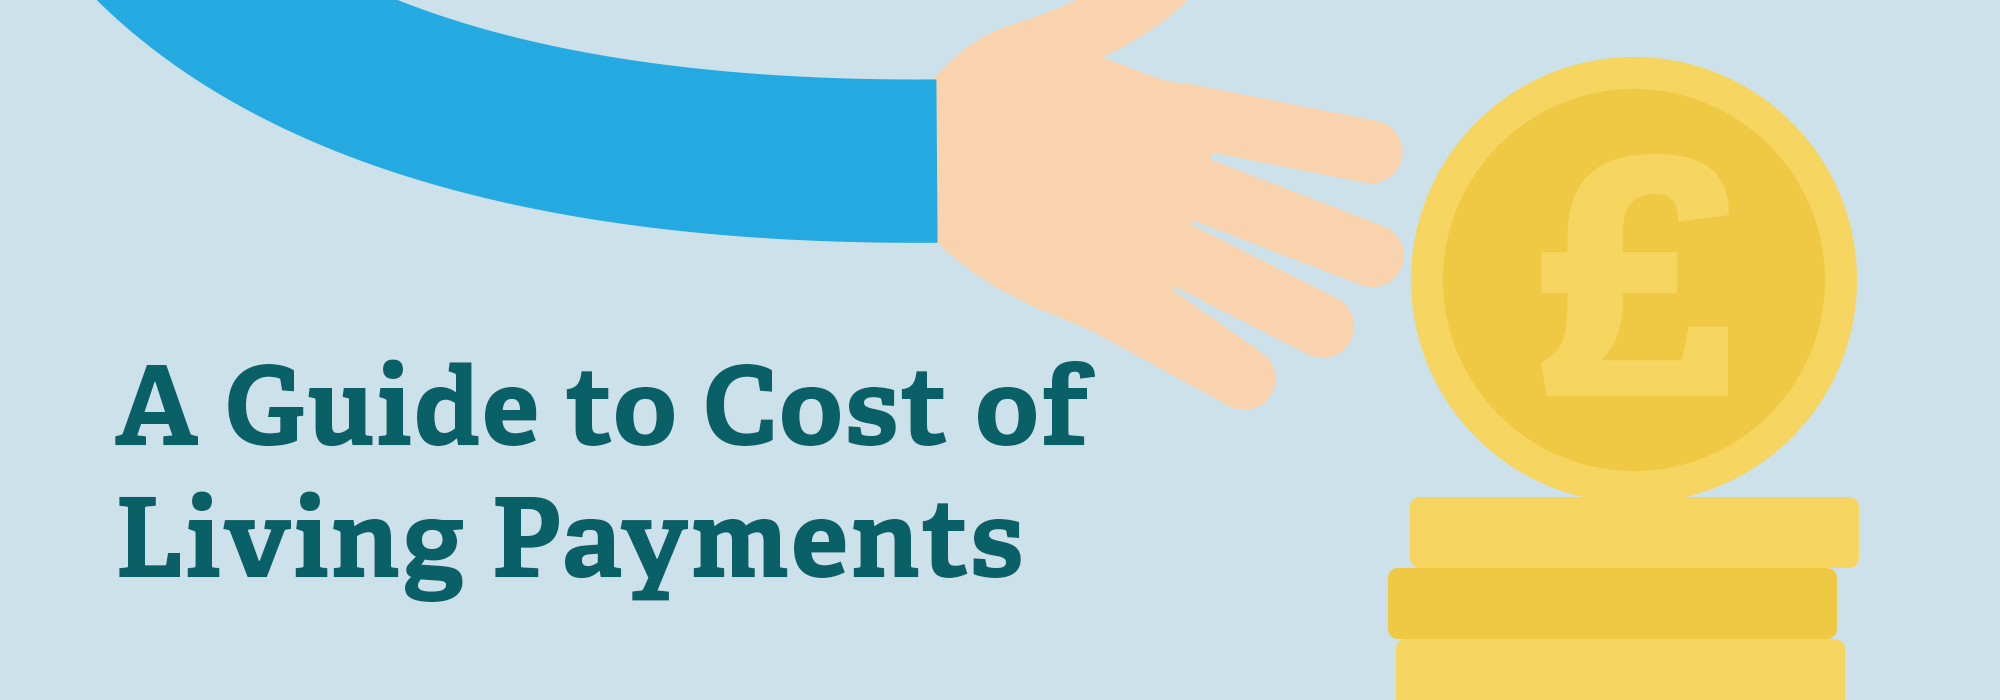 Cost of Living Payments NRAS